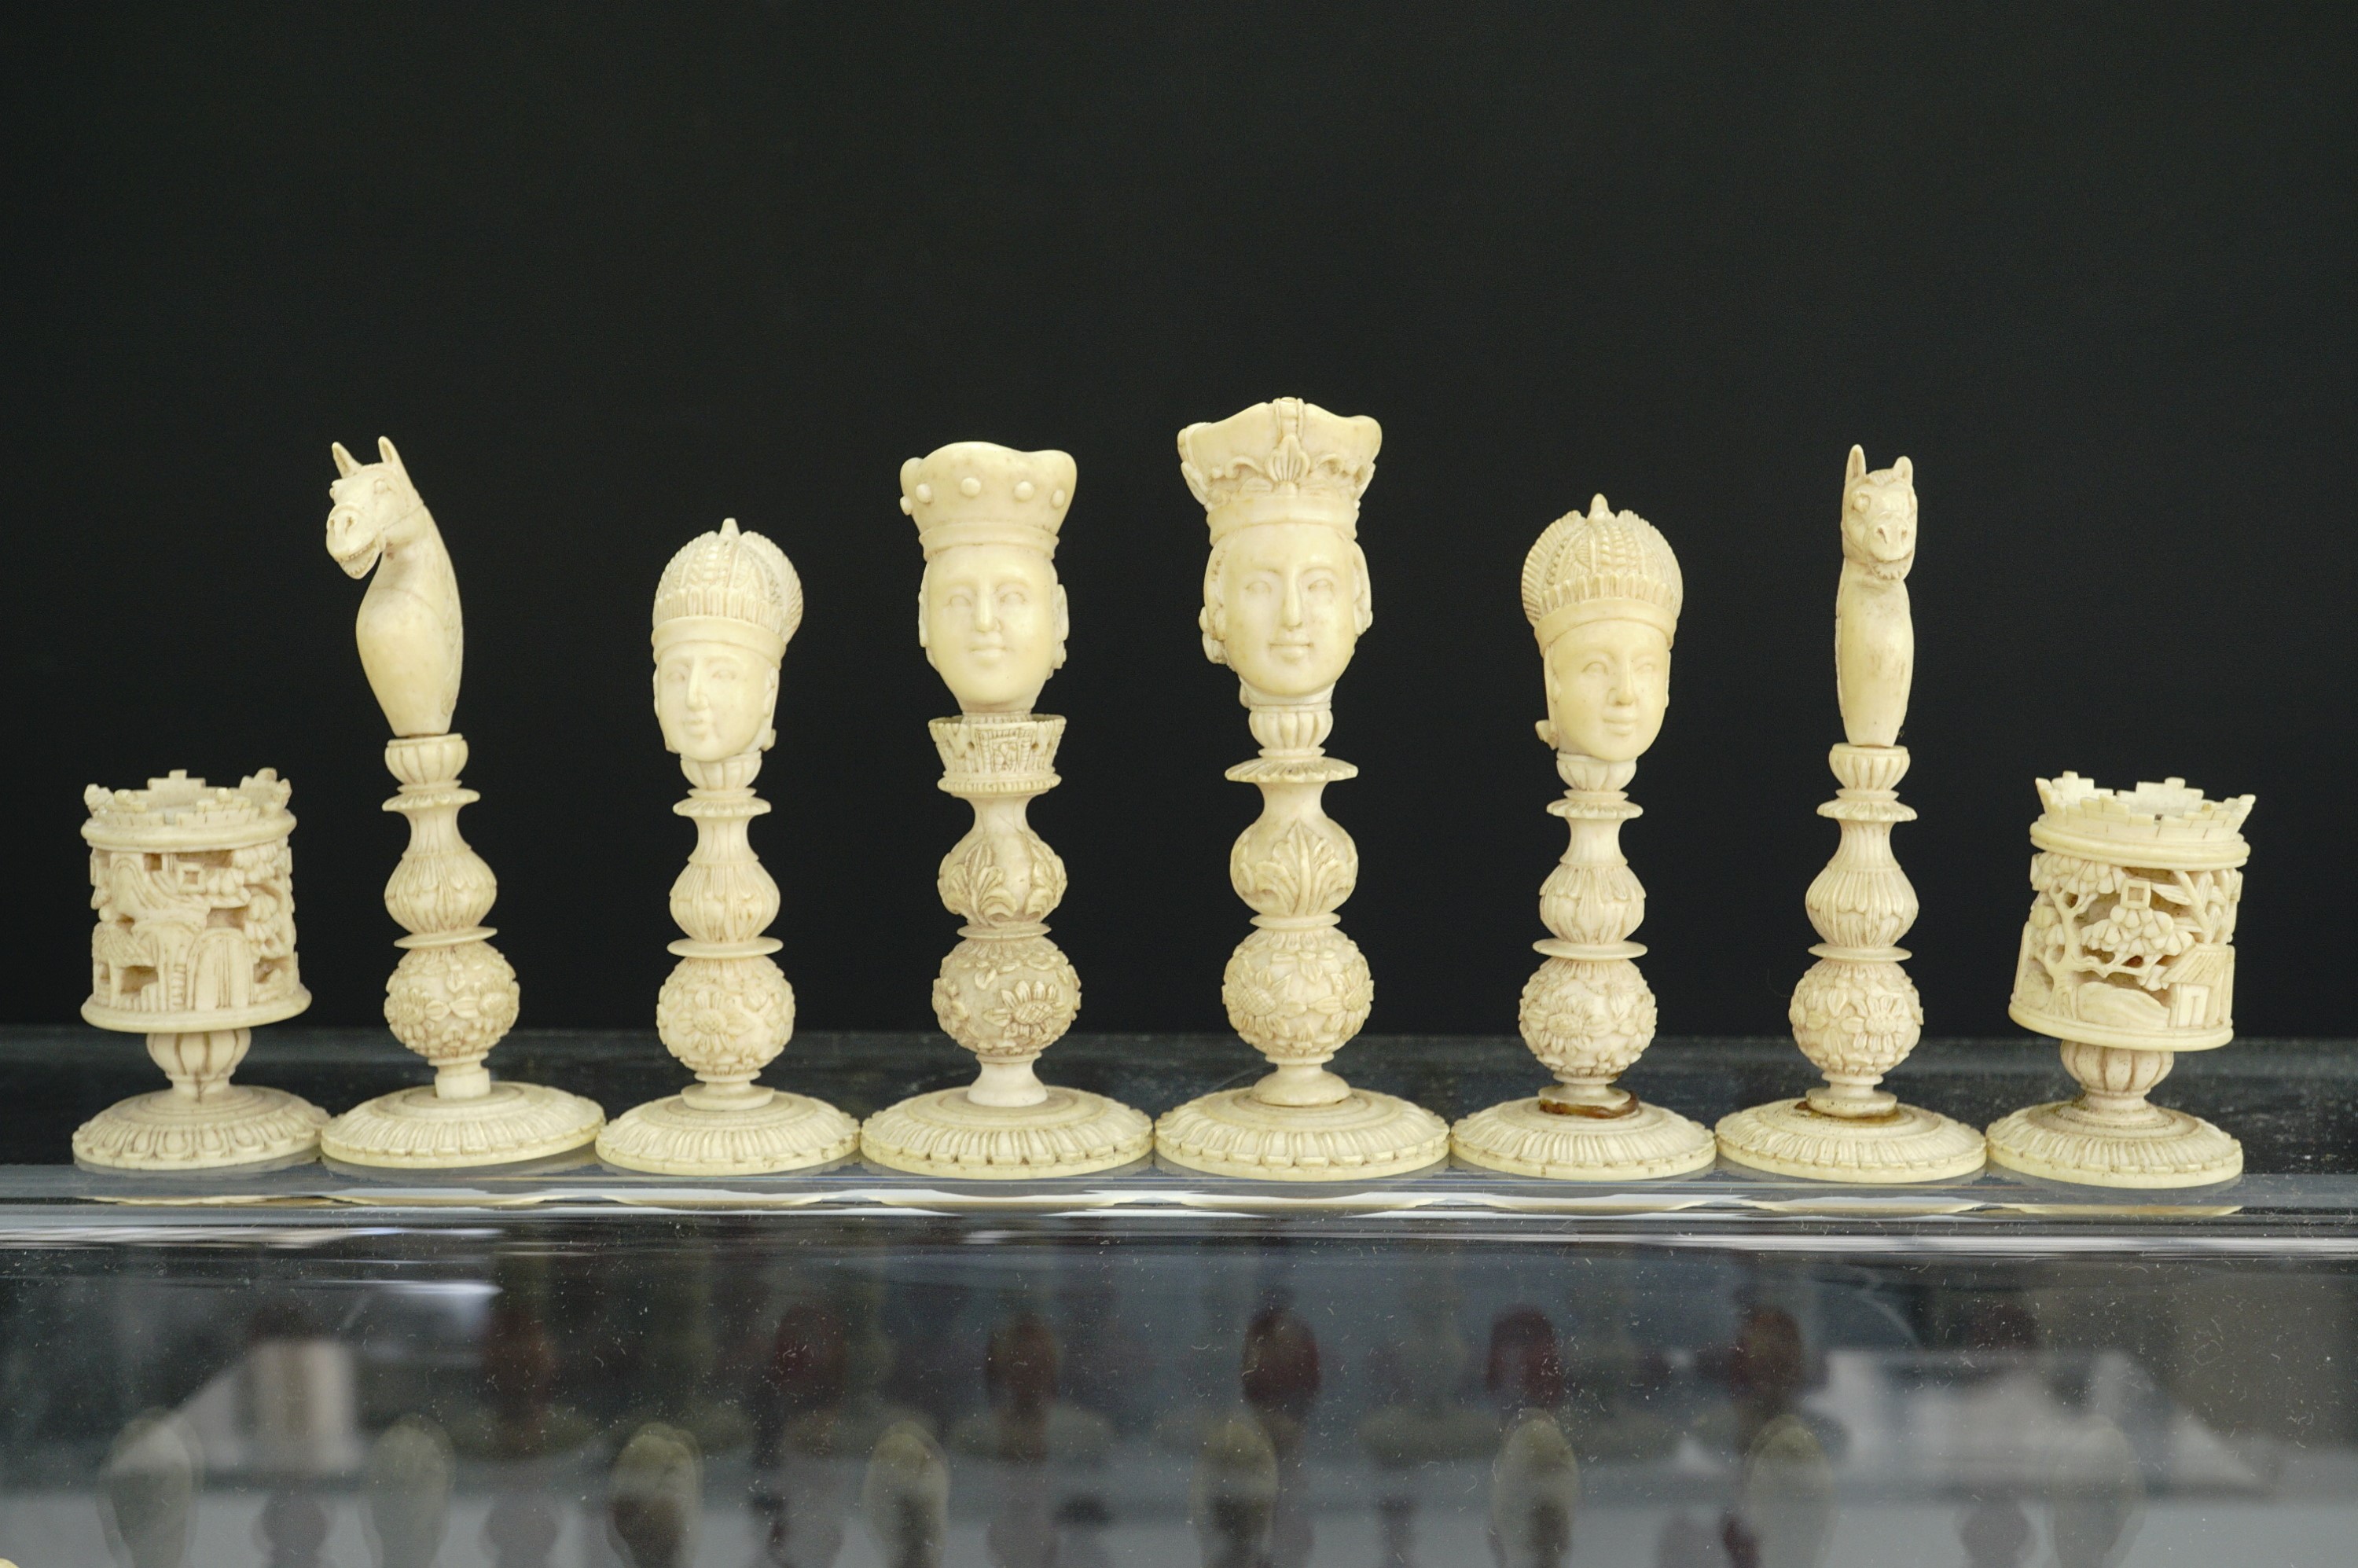 A late 18th / early 19th Century Chinese / Canton export ivory chess set, likely Macau, Kings - Image 2 of 7